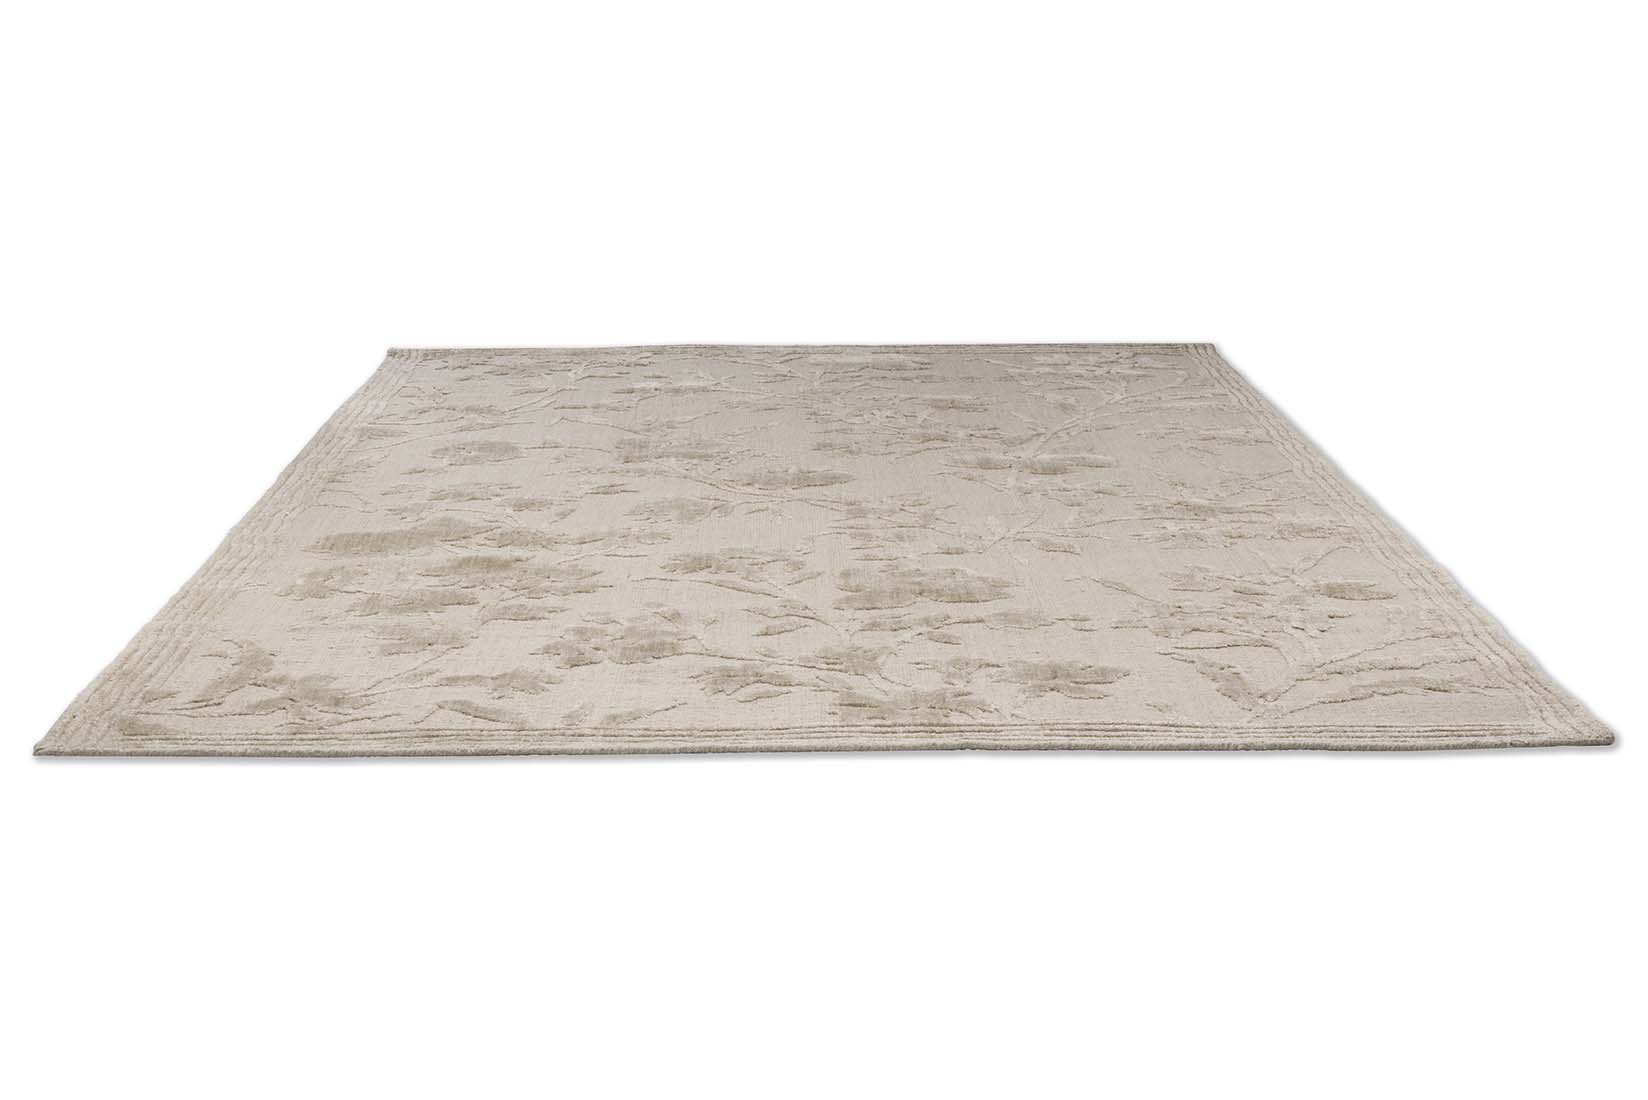  cotton and wool rug in beige with floral design.
